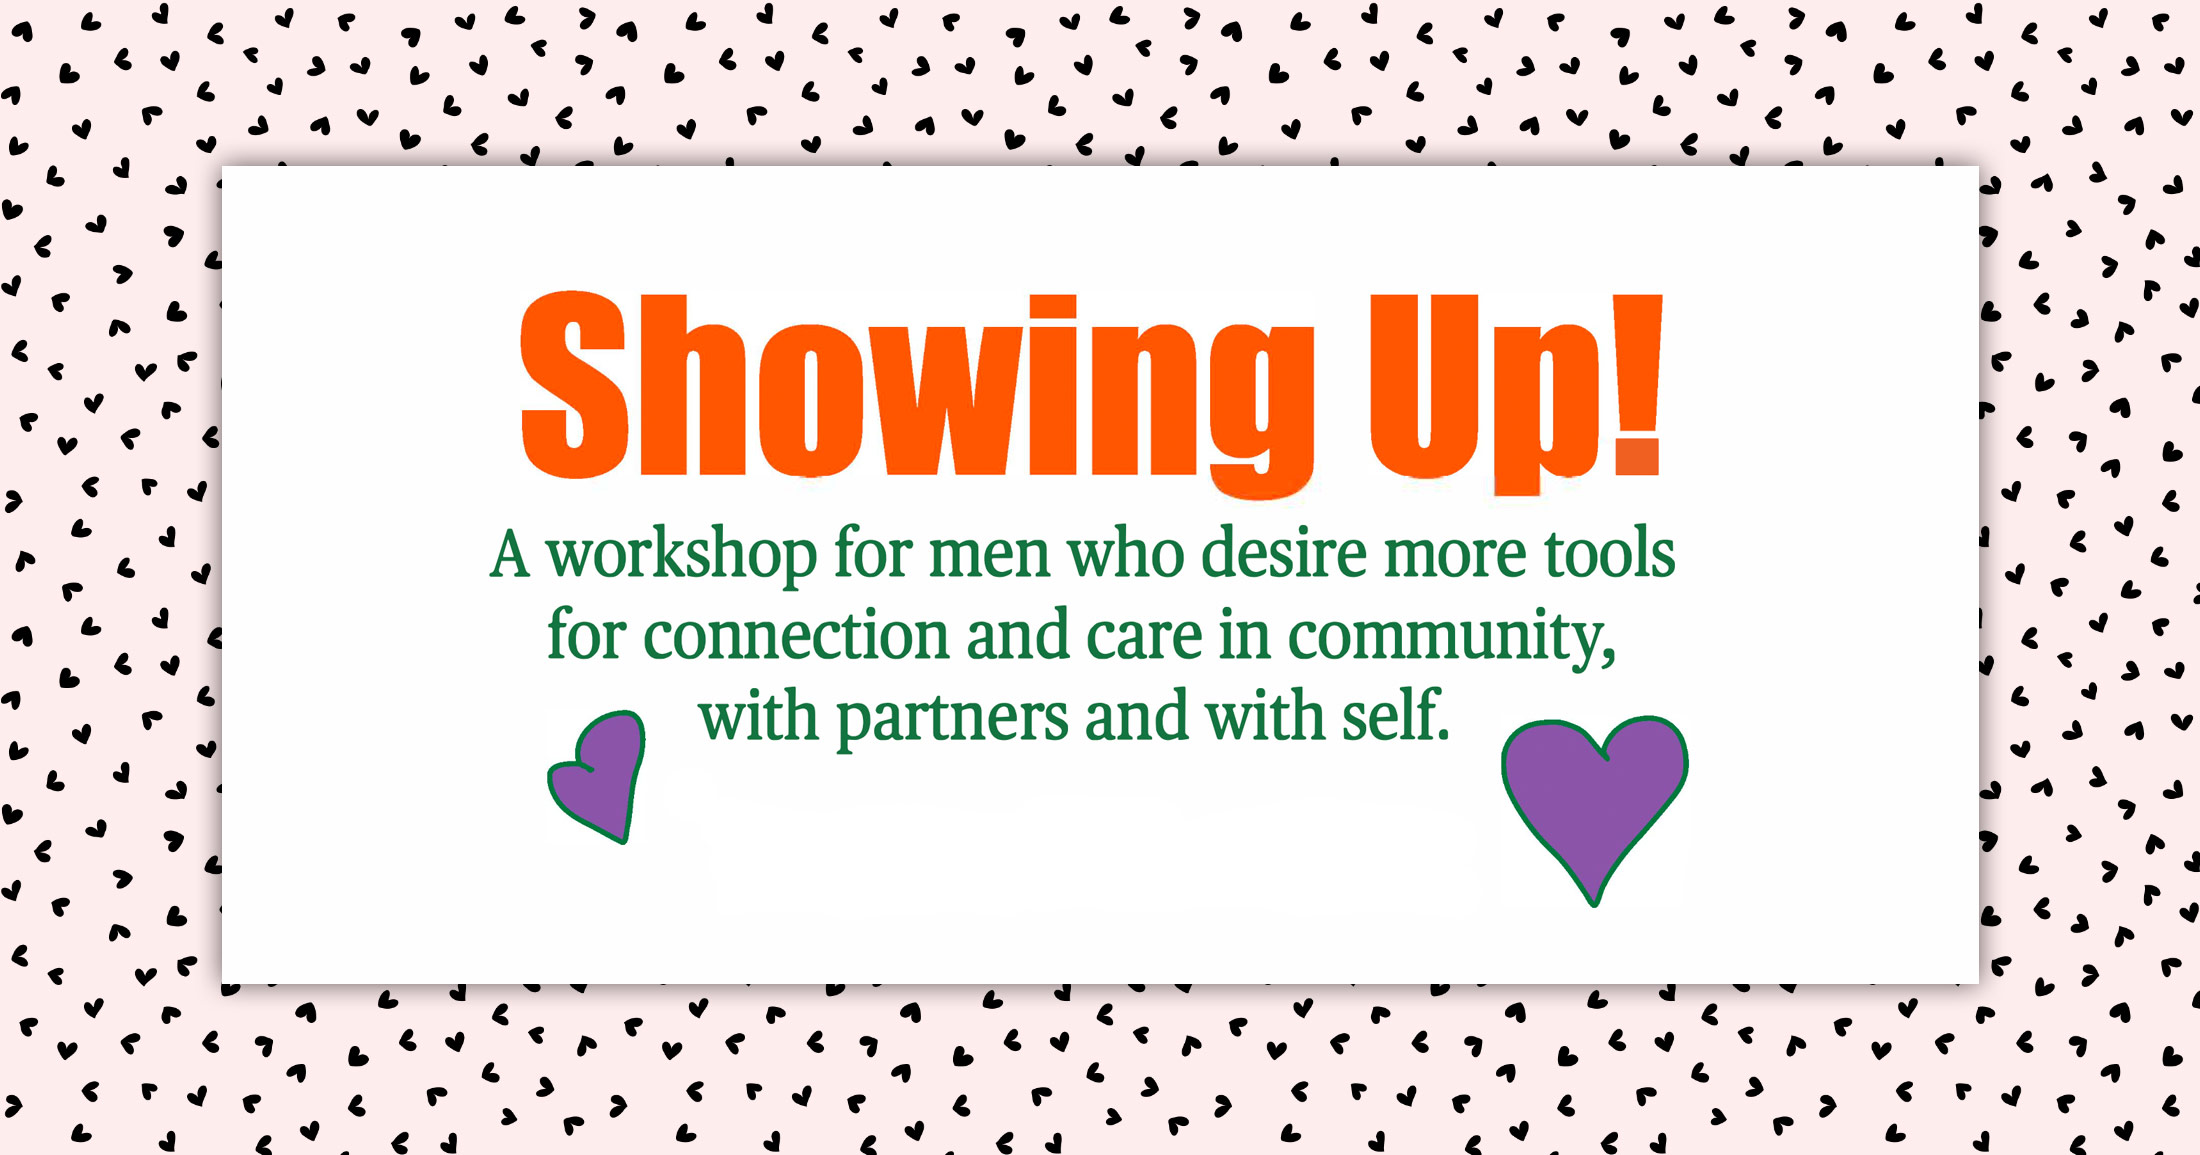 Showing Up! A workshop for men who desire more tools for connection and care in community, with partners and with self.